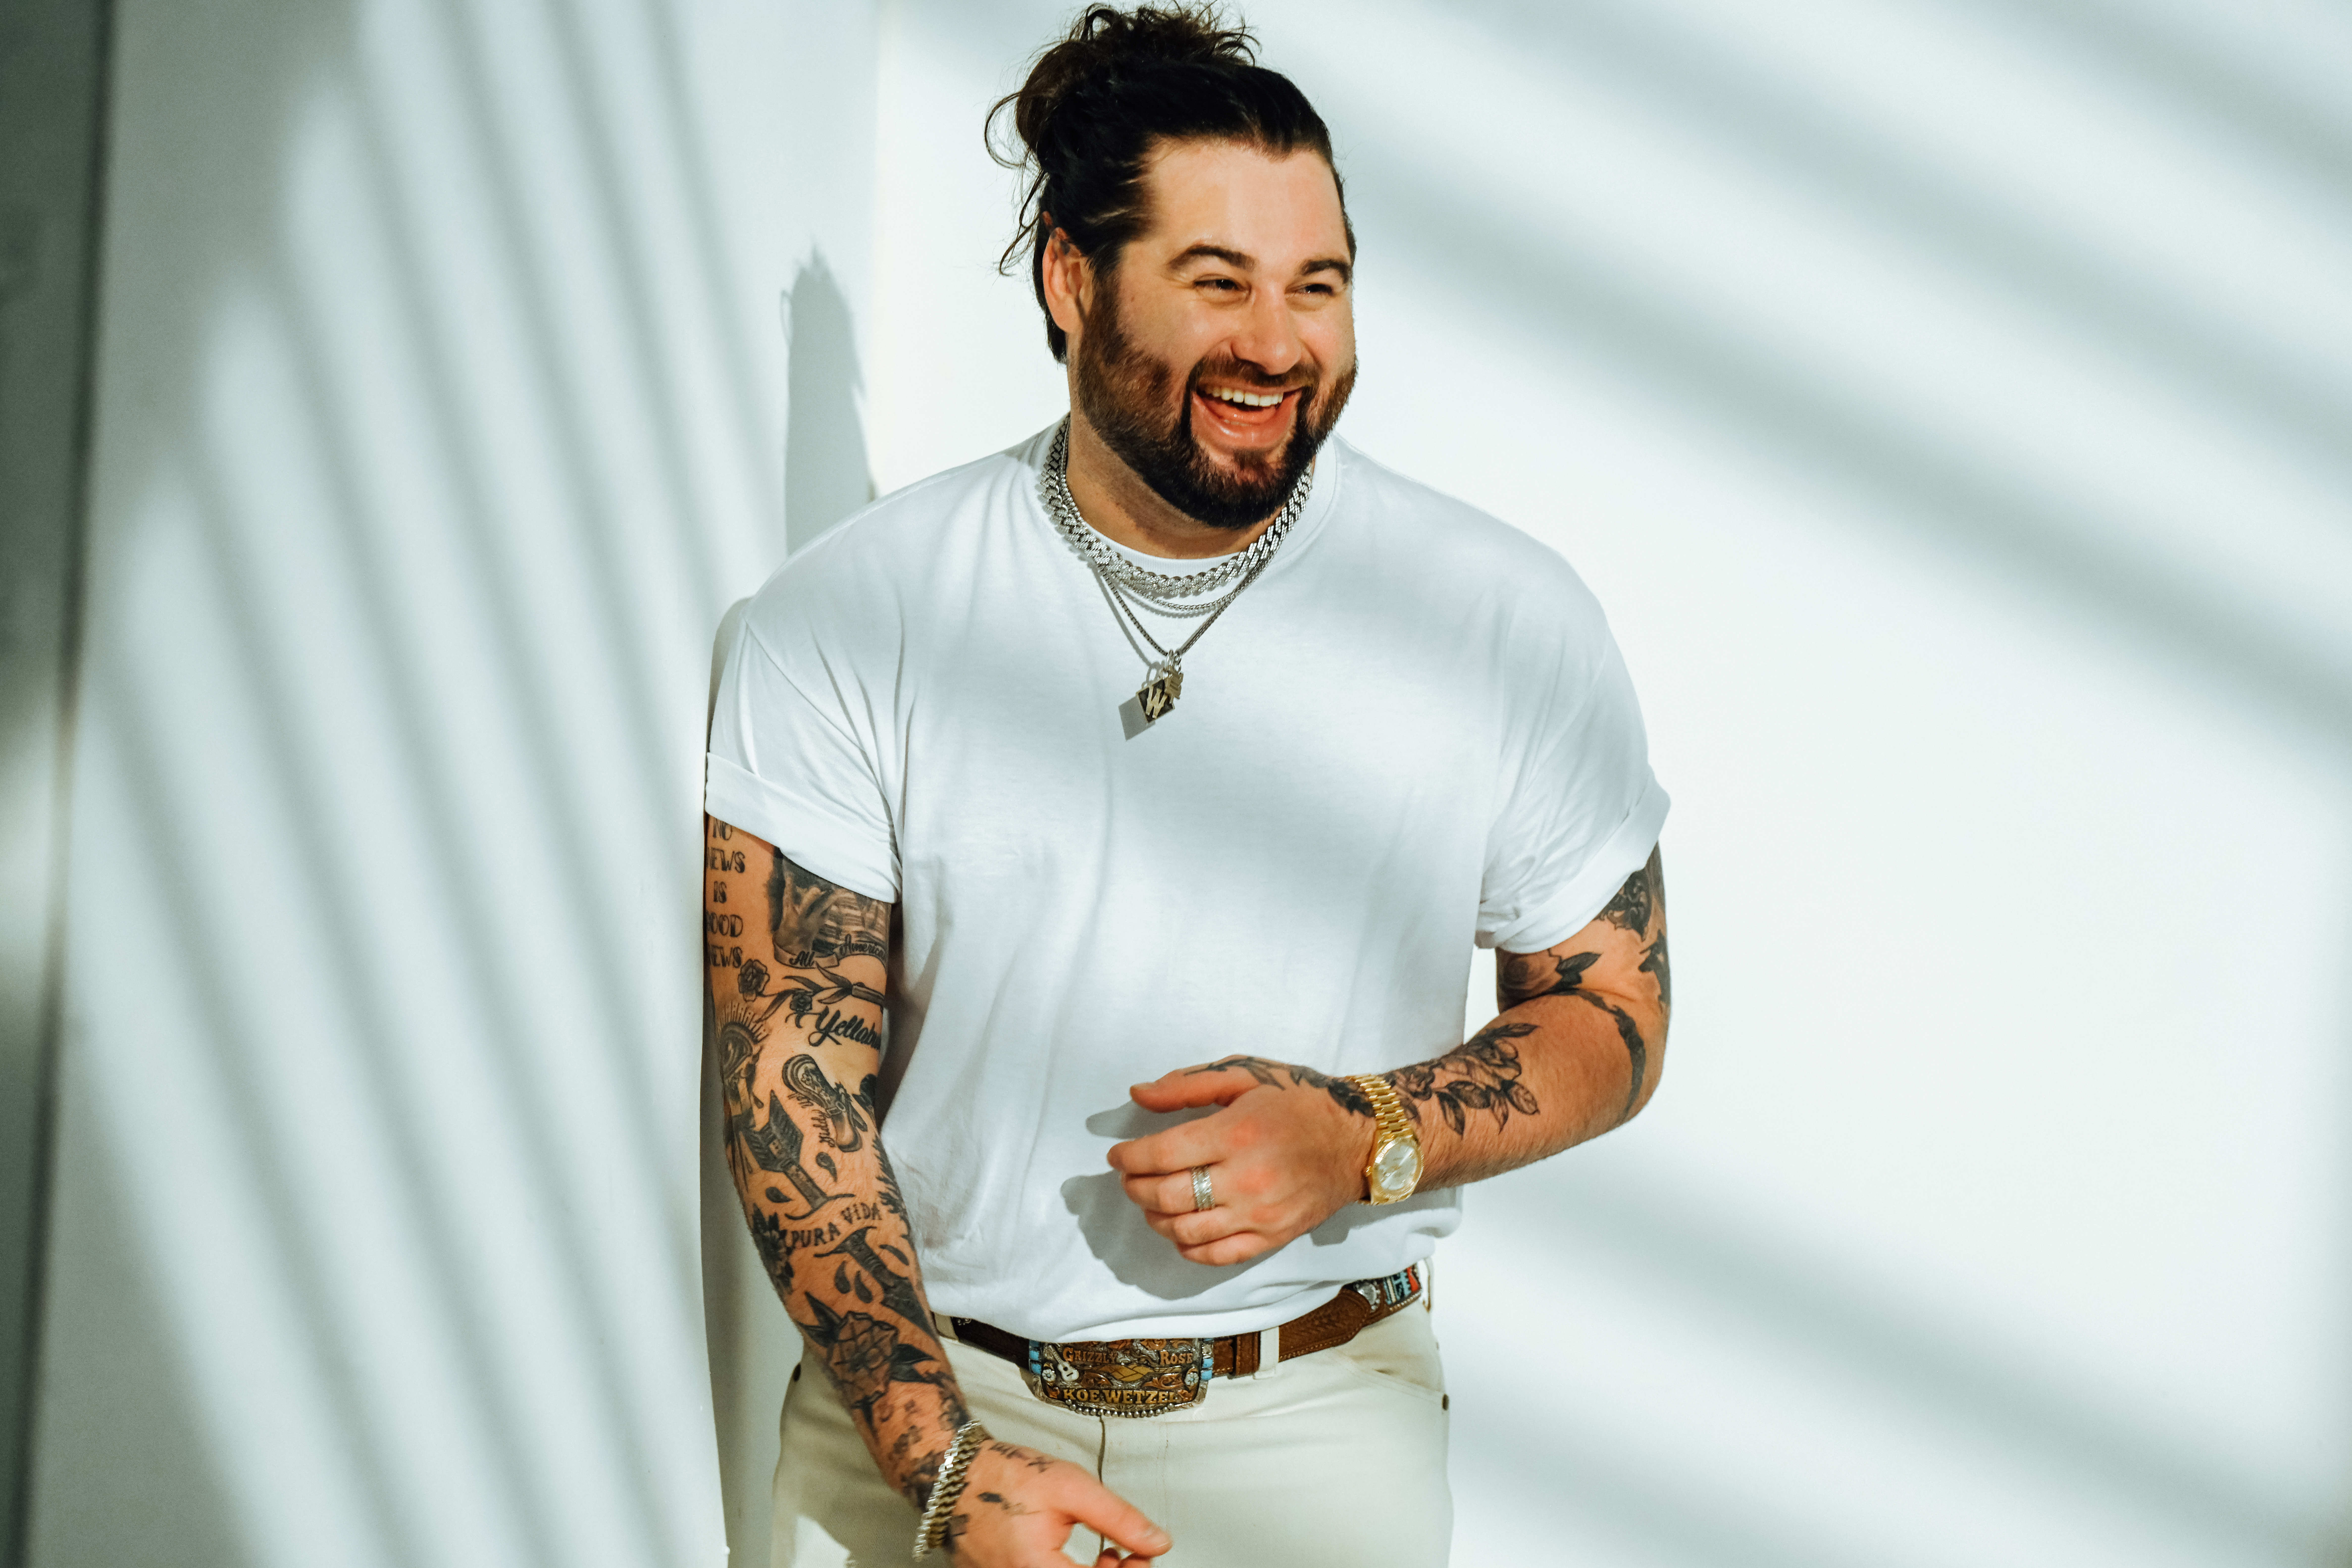 Wearing all white, Koe Wetzel smiles at the camera